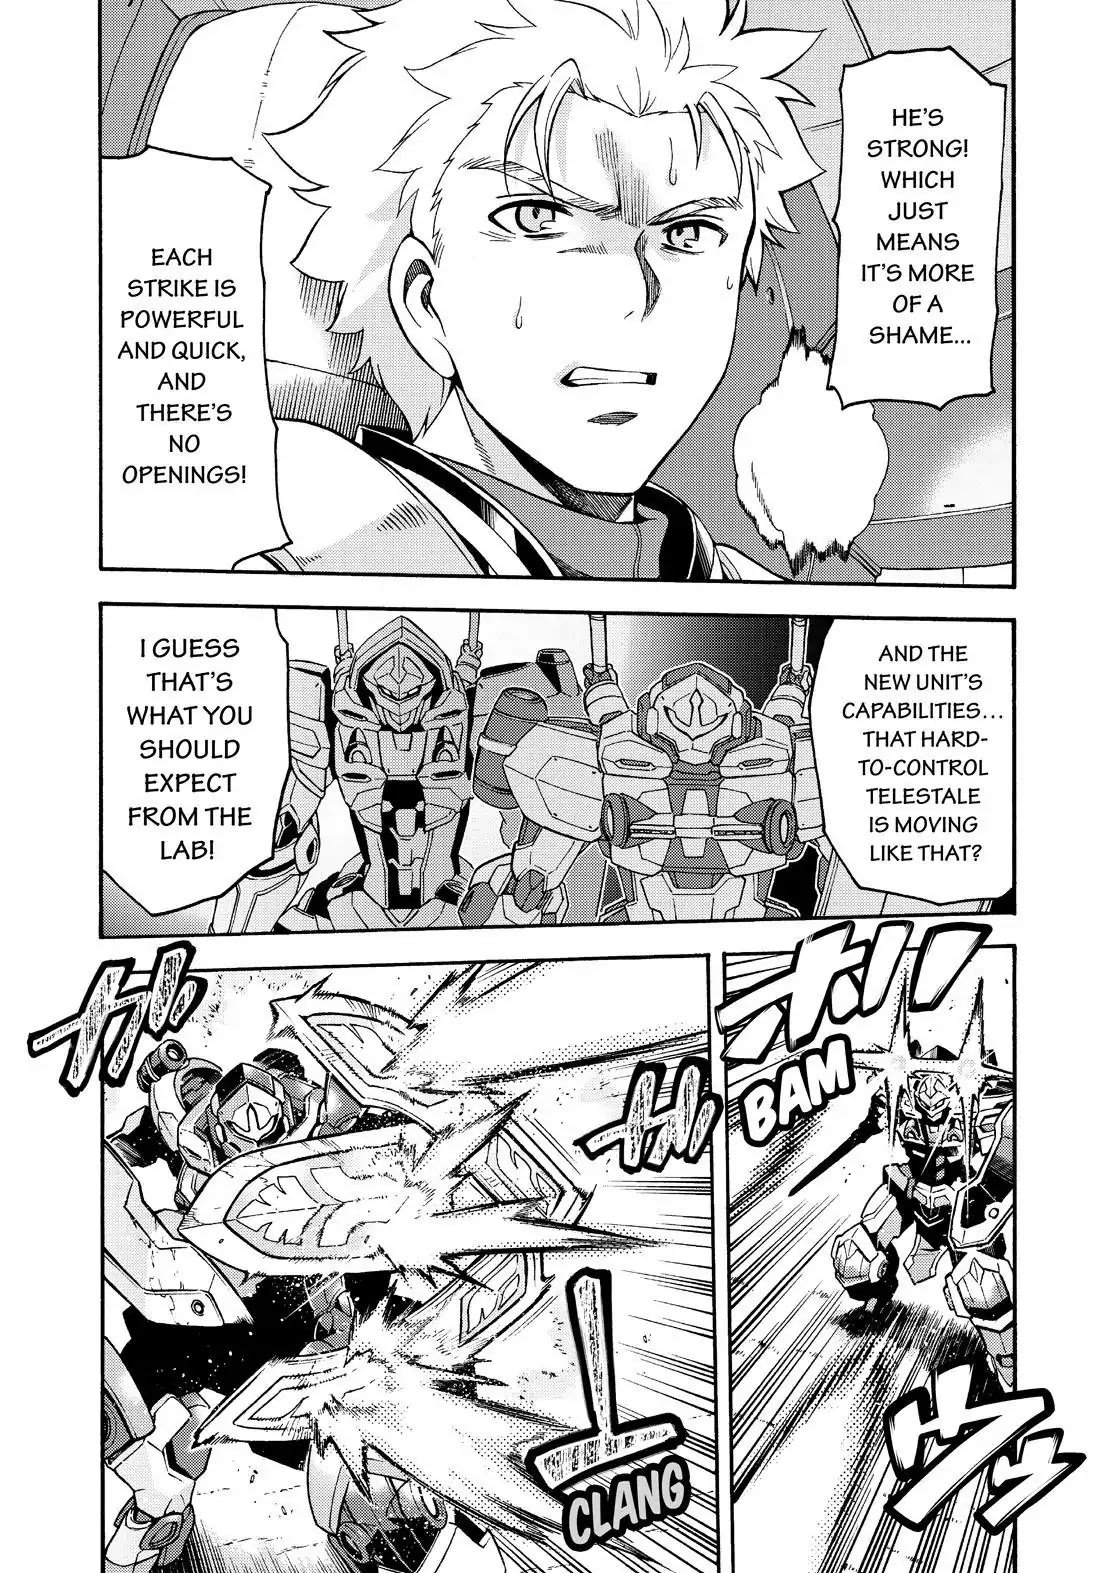 Knights and Magic Chapter 43